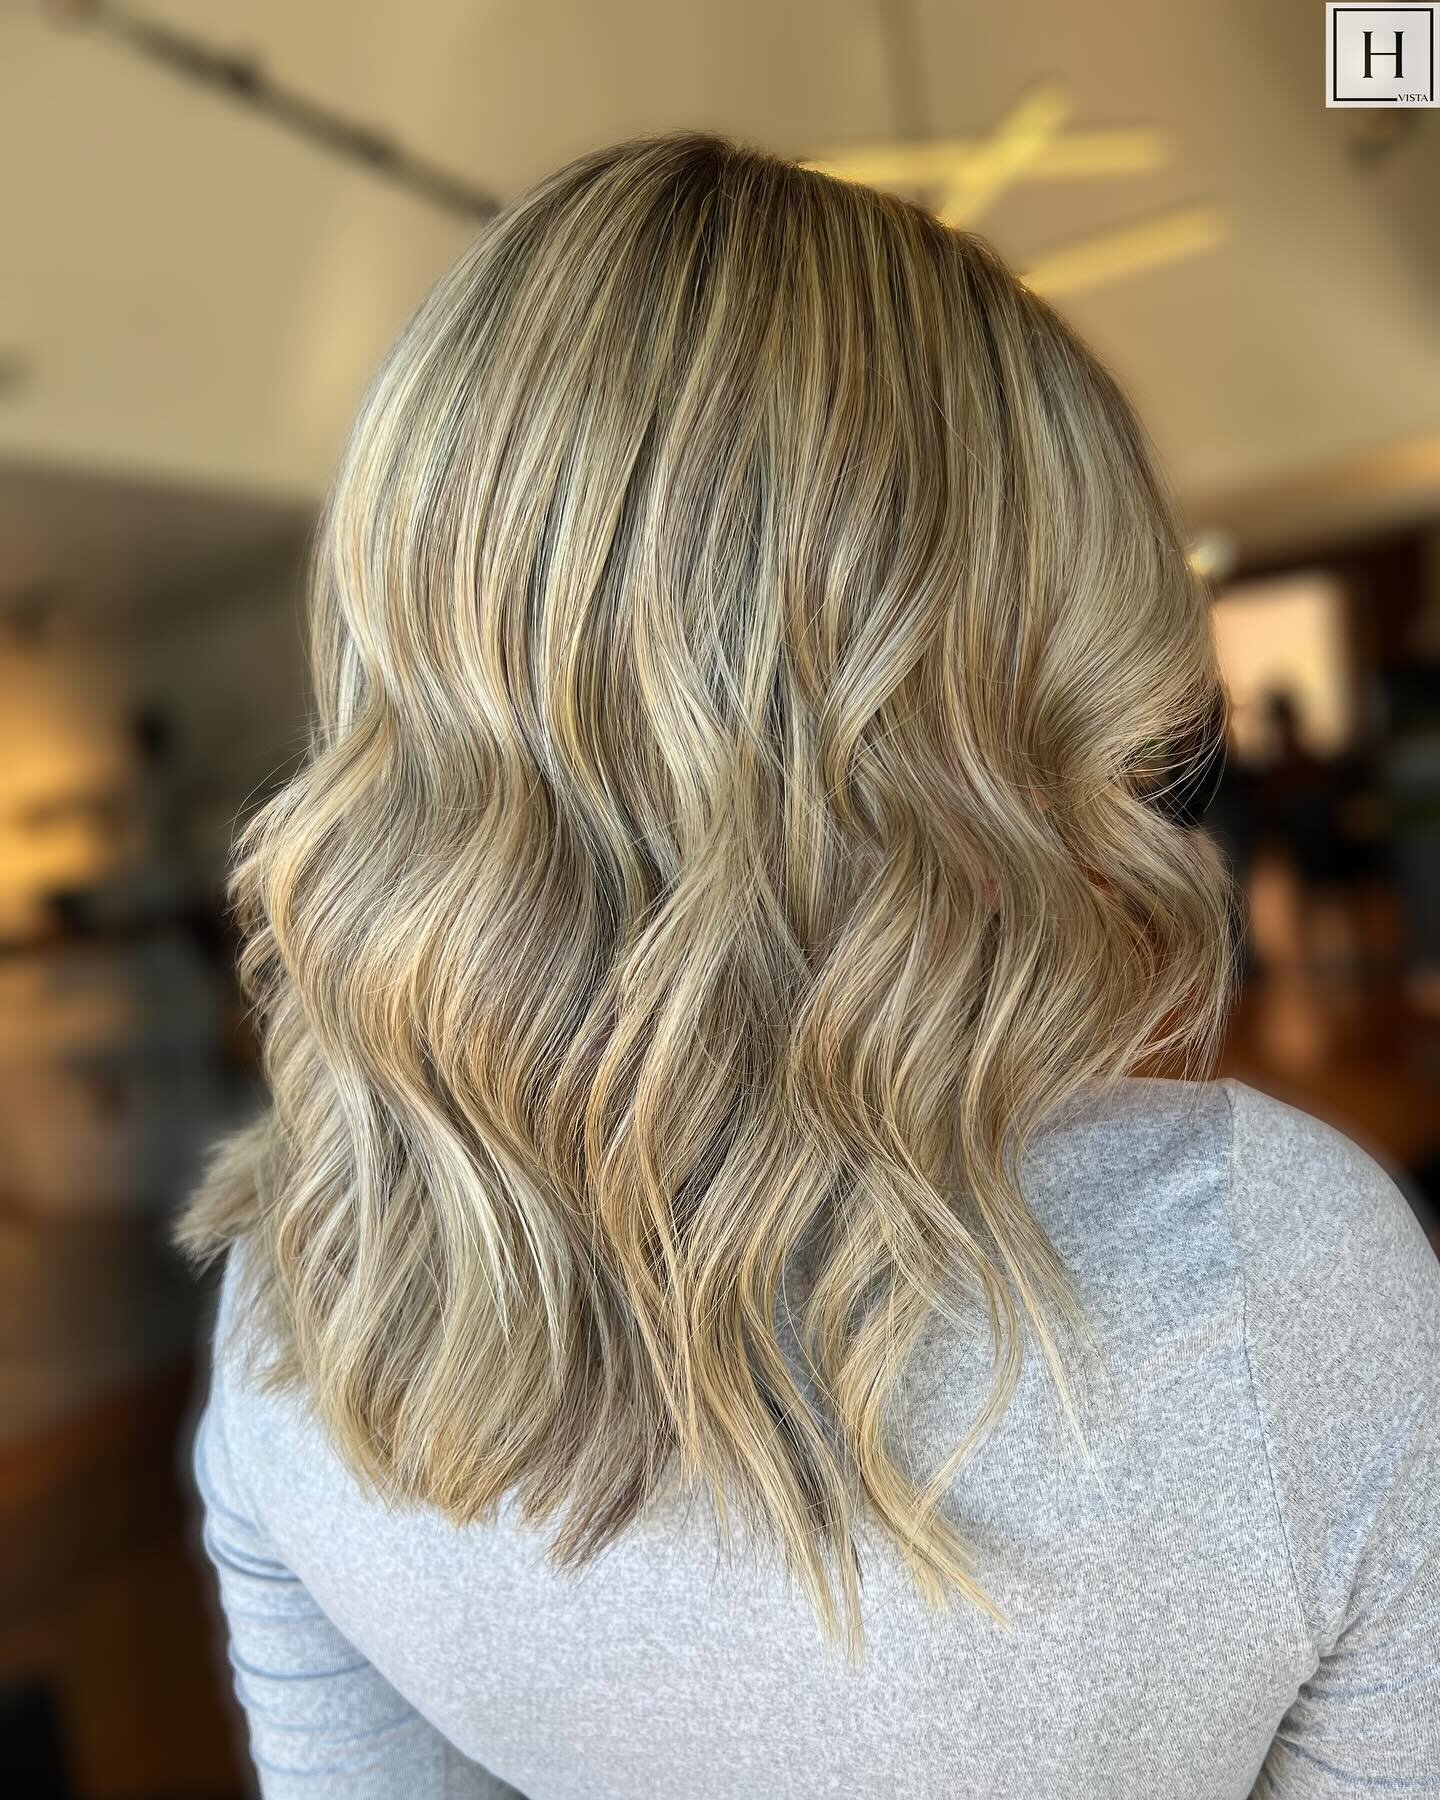 C H E E R S to the freakin&rsquo; weekend 🥂

Stylist: @hairbyclaired

#hairstylist #hairsalon #hydevista #columbiasc #downtowncola #thevista